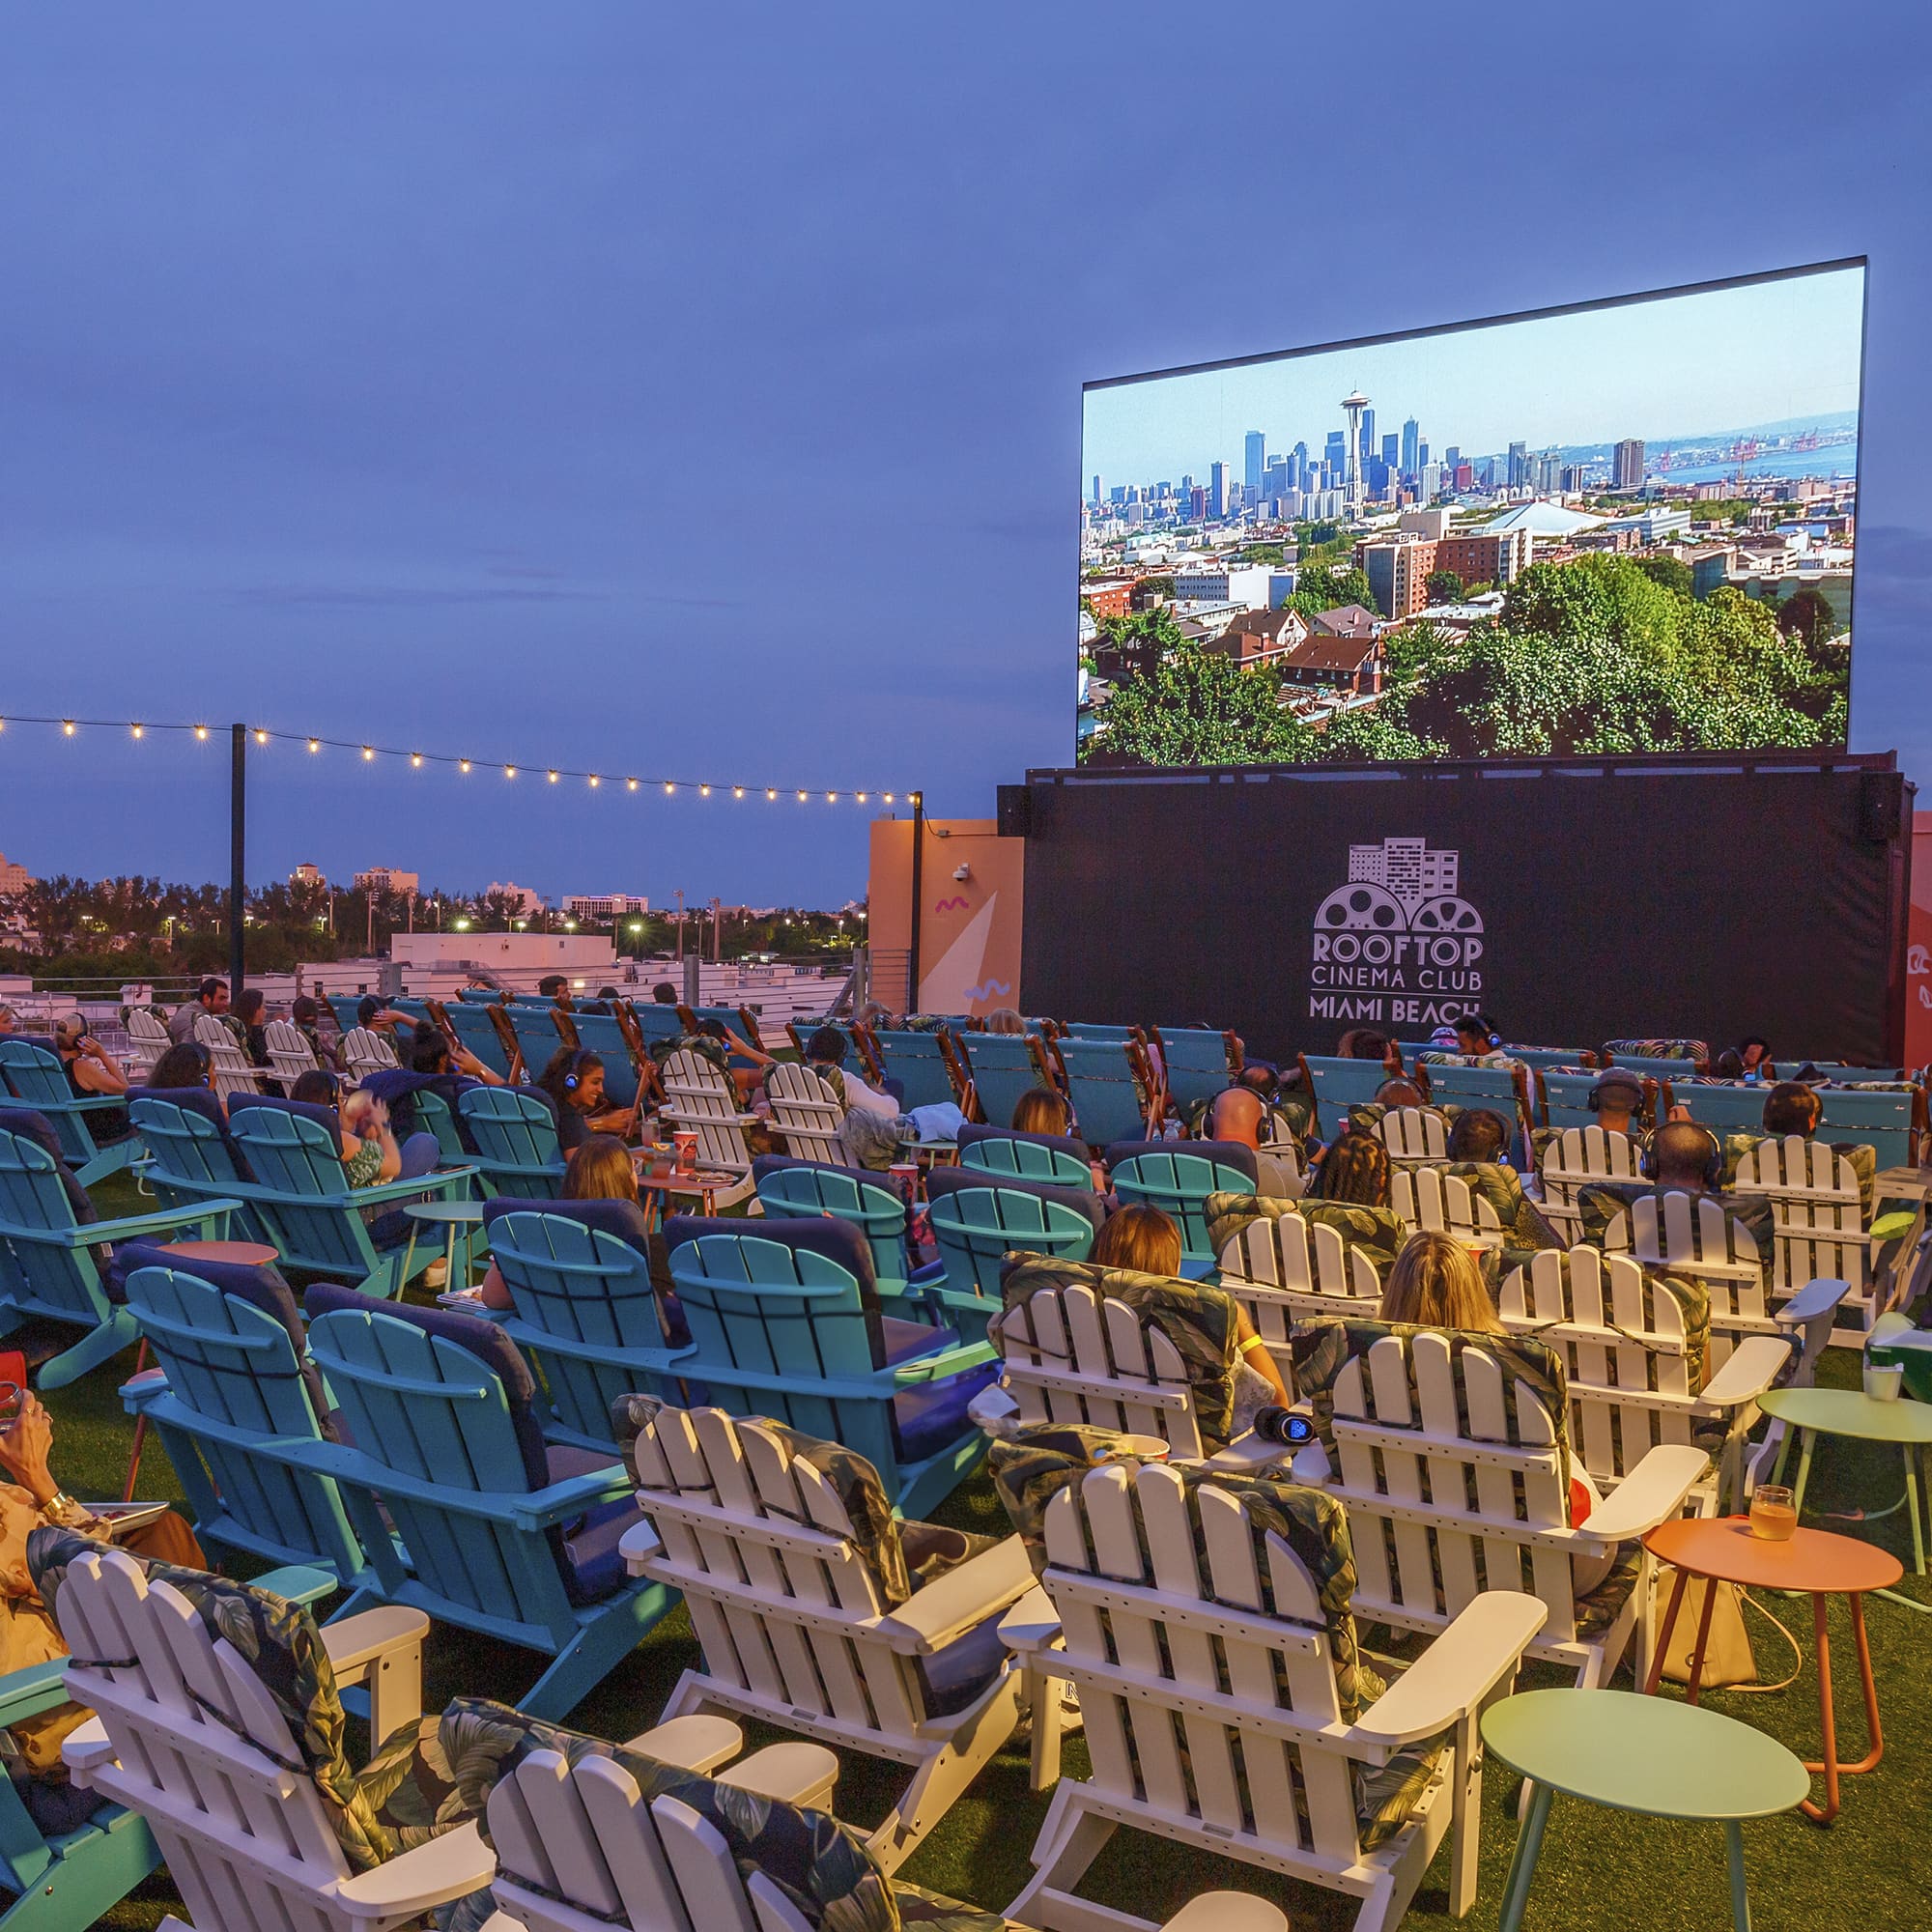 Enjoy the best outdoor cinema experience in Miami, with sunsets and starlit evenings, stunning views, friends and awesome drink and food